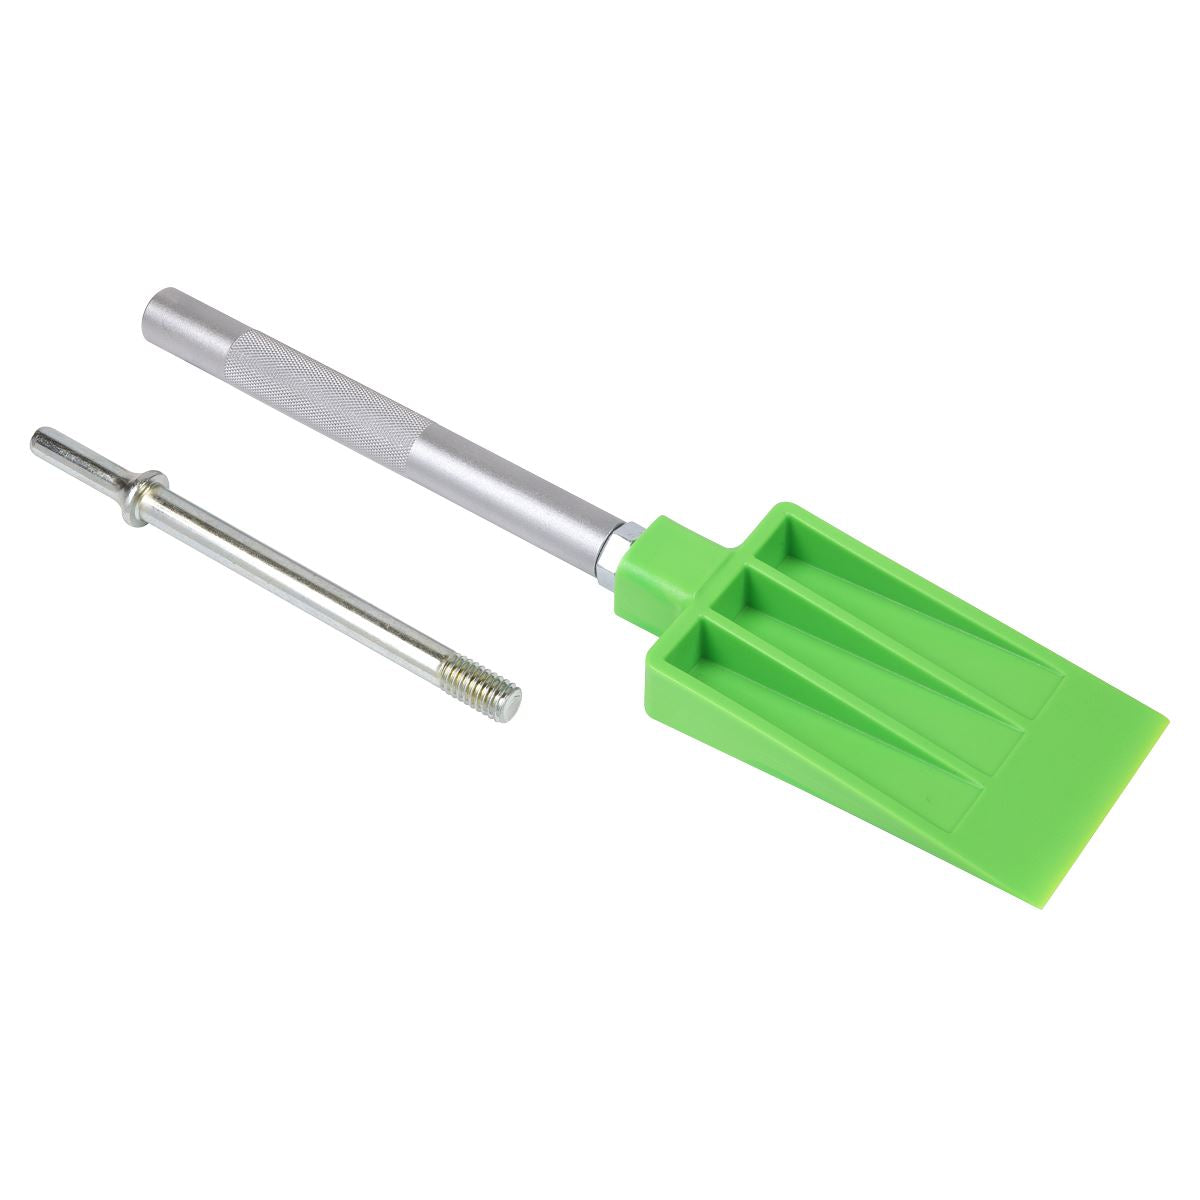 Sealey Removal Tool Moulding/Trim